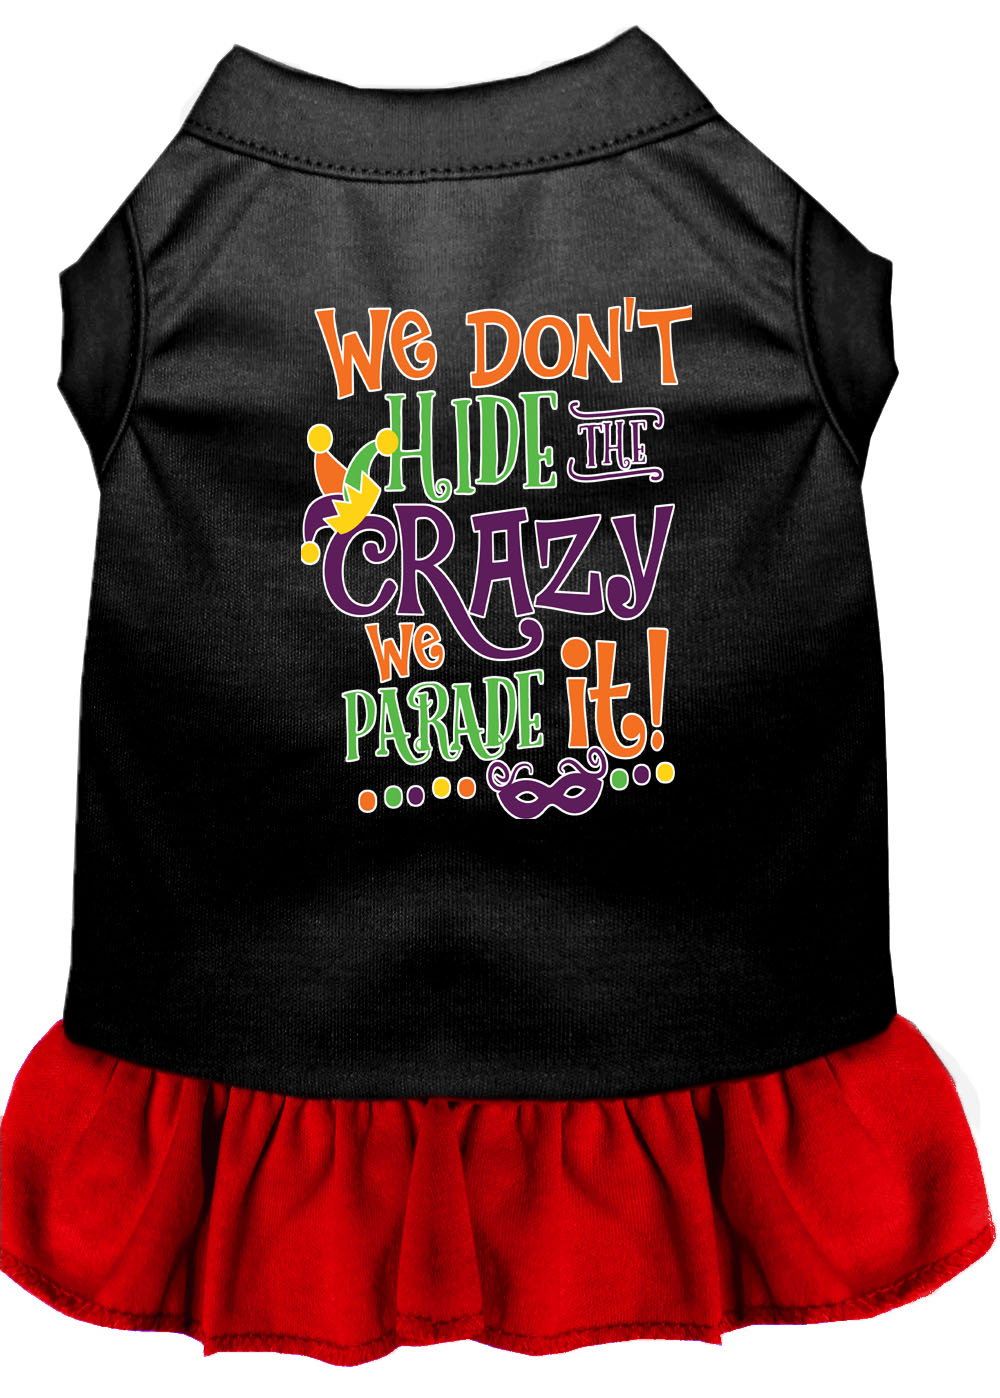 We Don't Hide the Crazy Screen Print Mardi Gras Dog Dress Black with Red Med